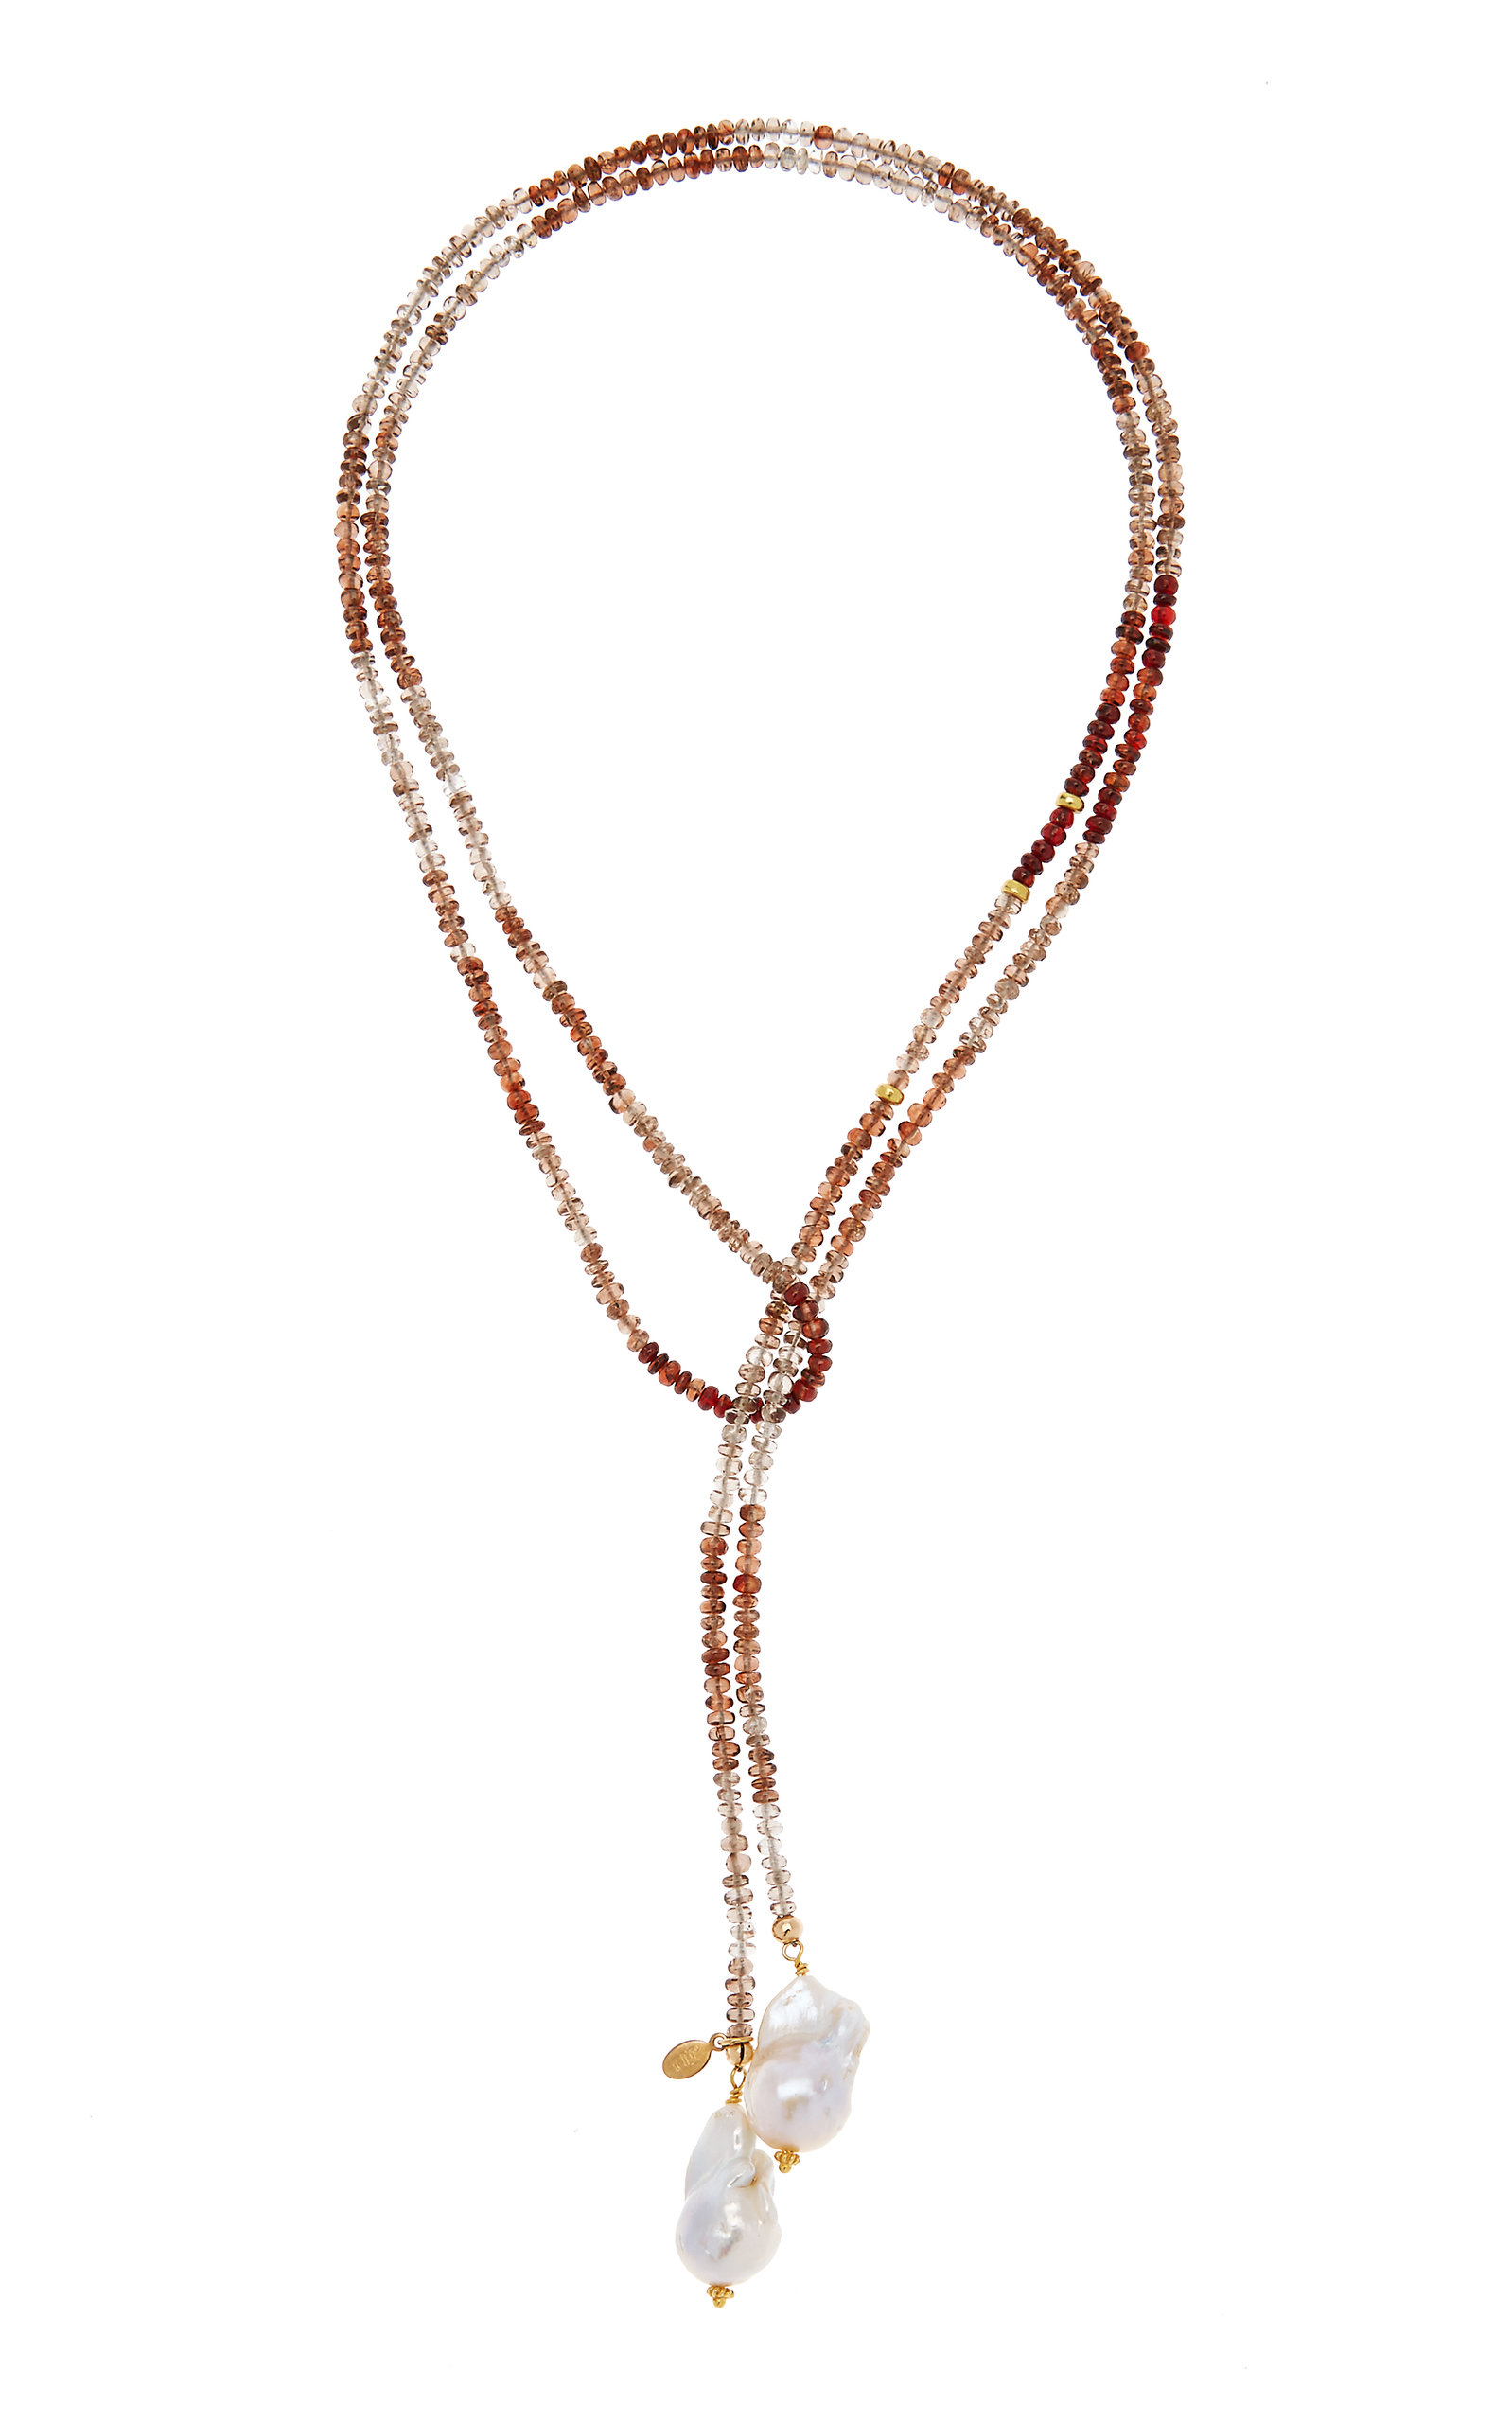 Joie DiGiovanni Women's Exclusive Pearl Beaded Lariat Necklace